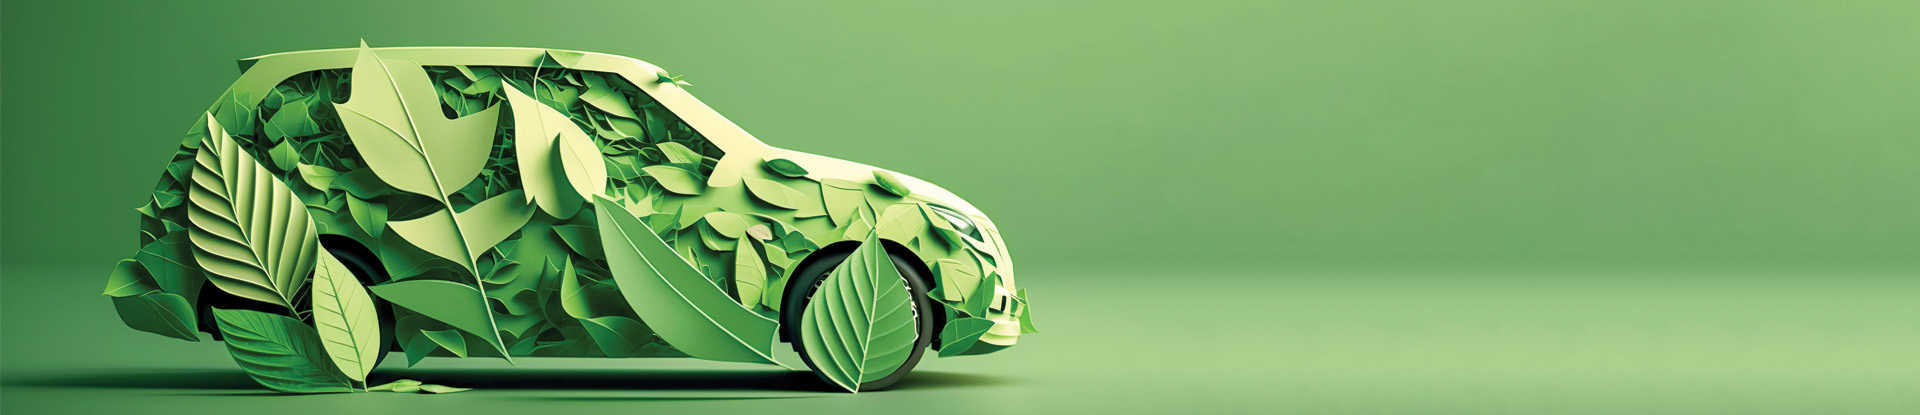 Green background with car graphic, but the car is made out of paper cut outs in the shape of leaves. 